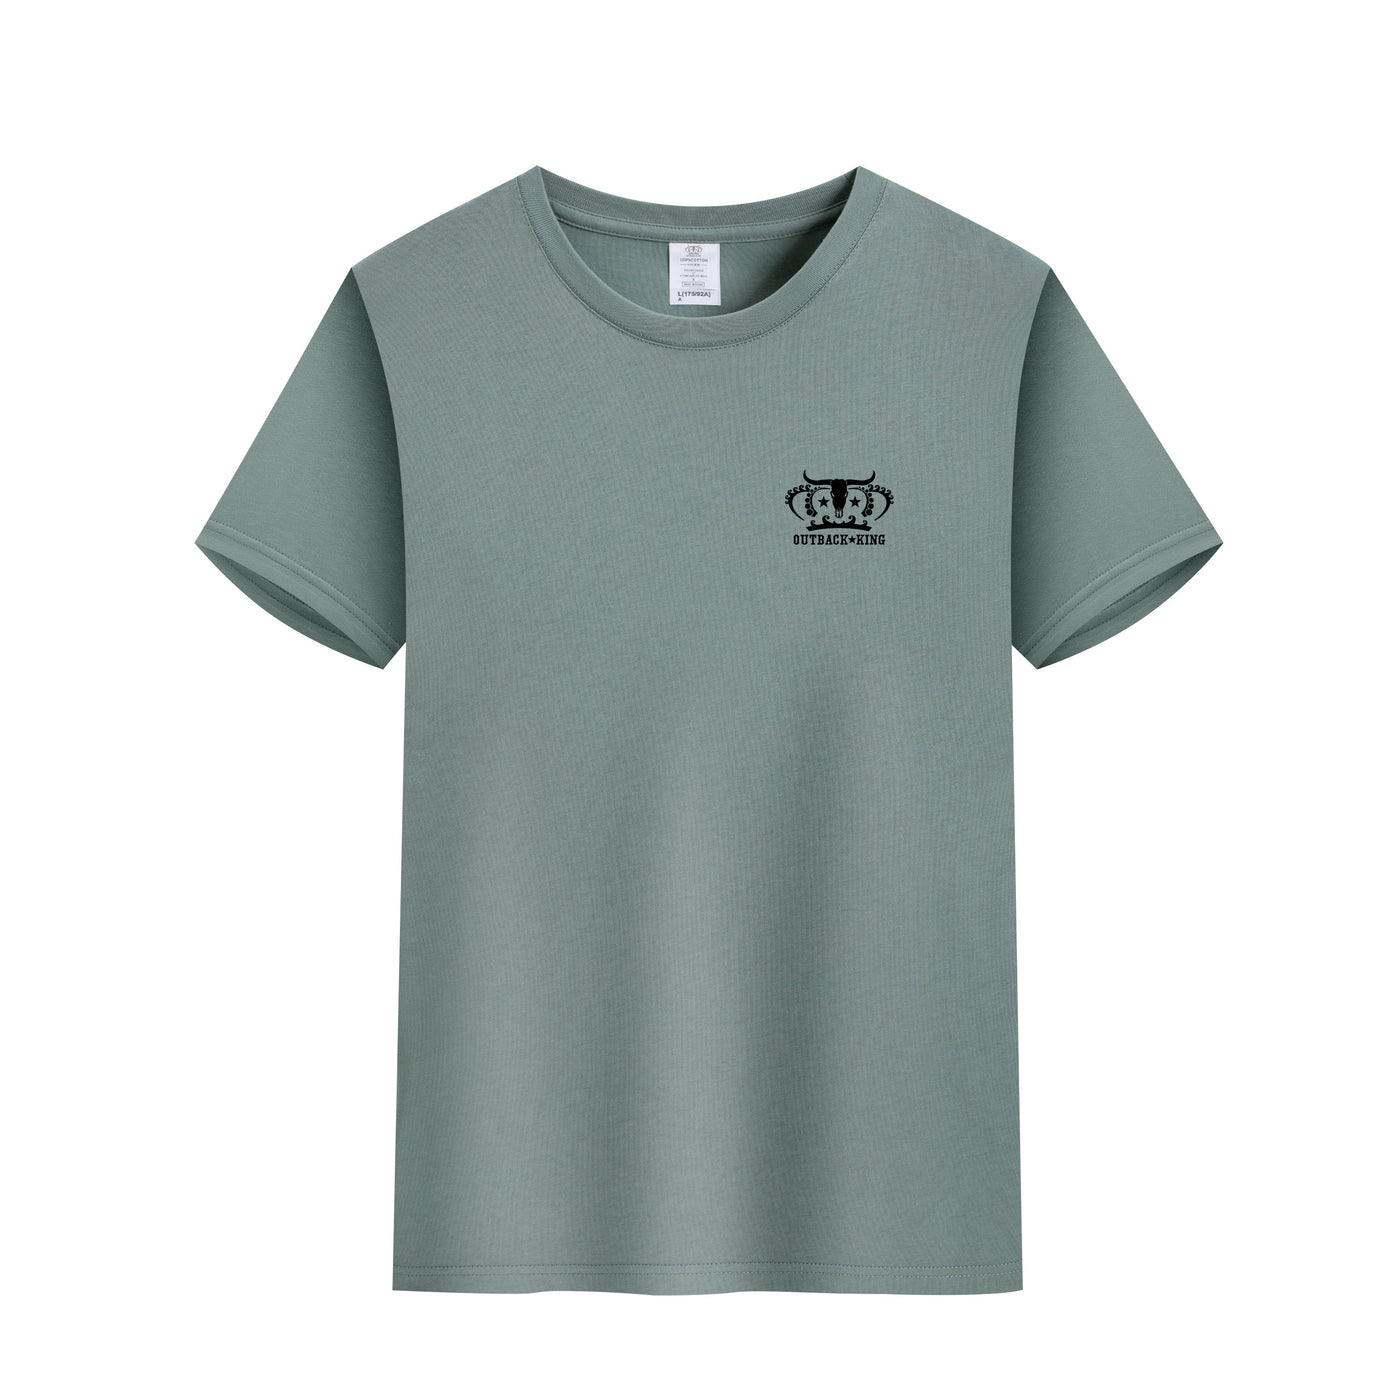 Outback King | T-shirt Nile green